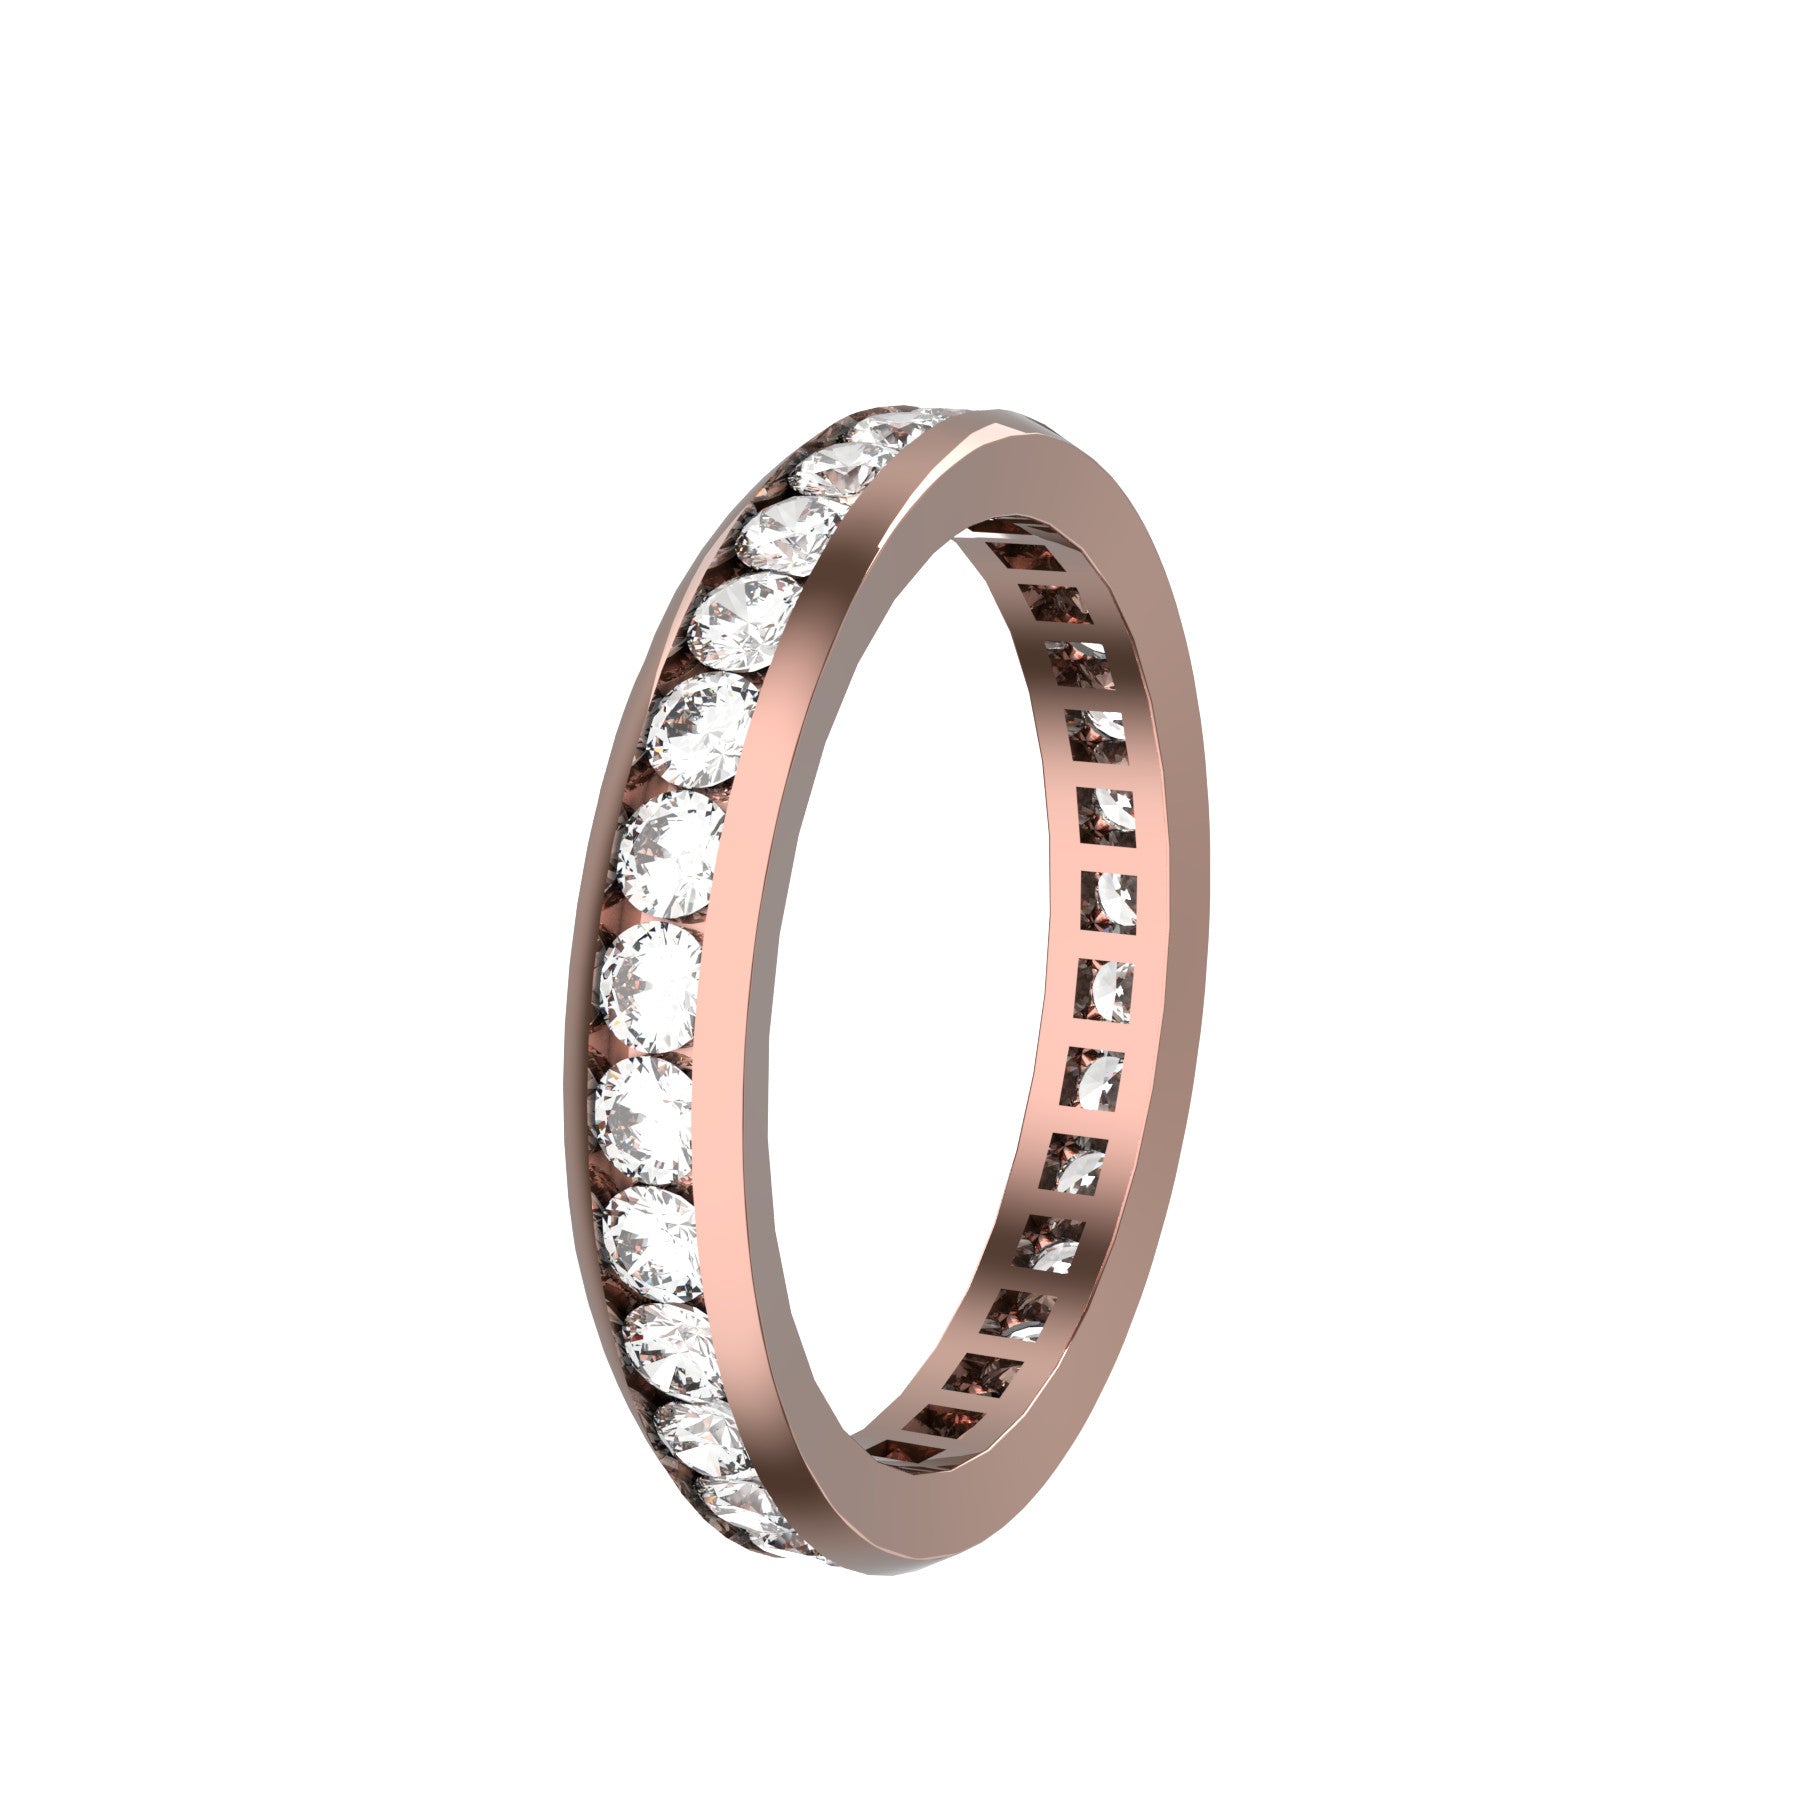  everlasting wedding band, 18 k pink gold, 0,03 ct round natural diamonds, weight about 2,60 g. (0,09 oz), width 3,20 mm